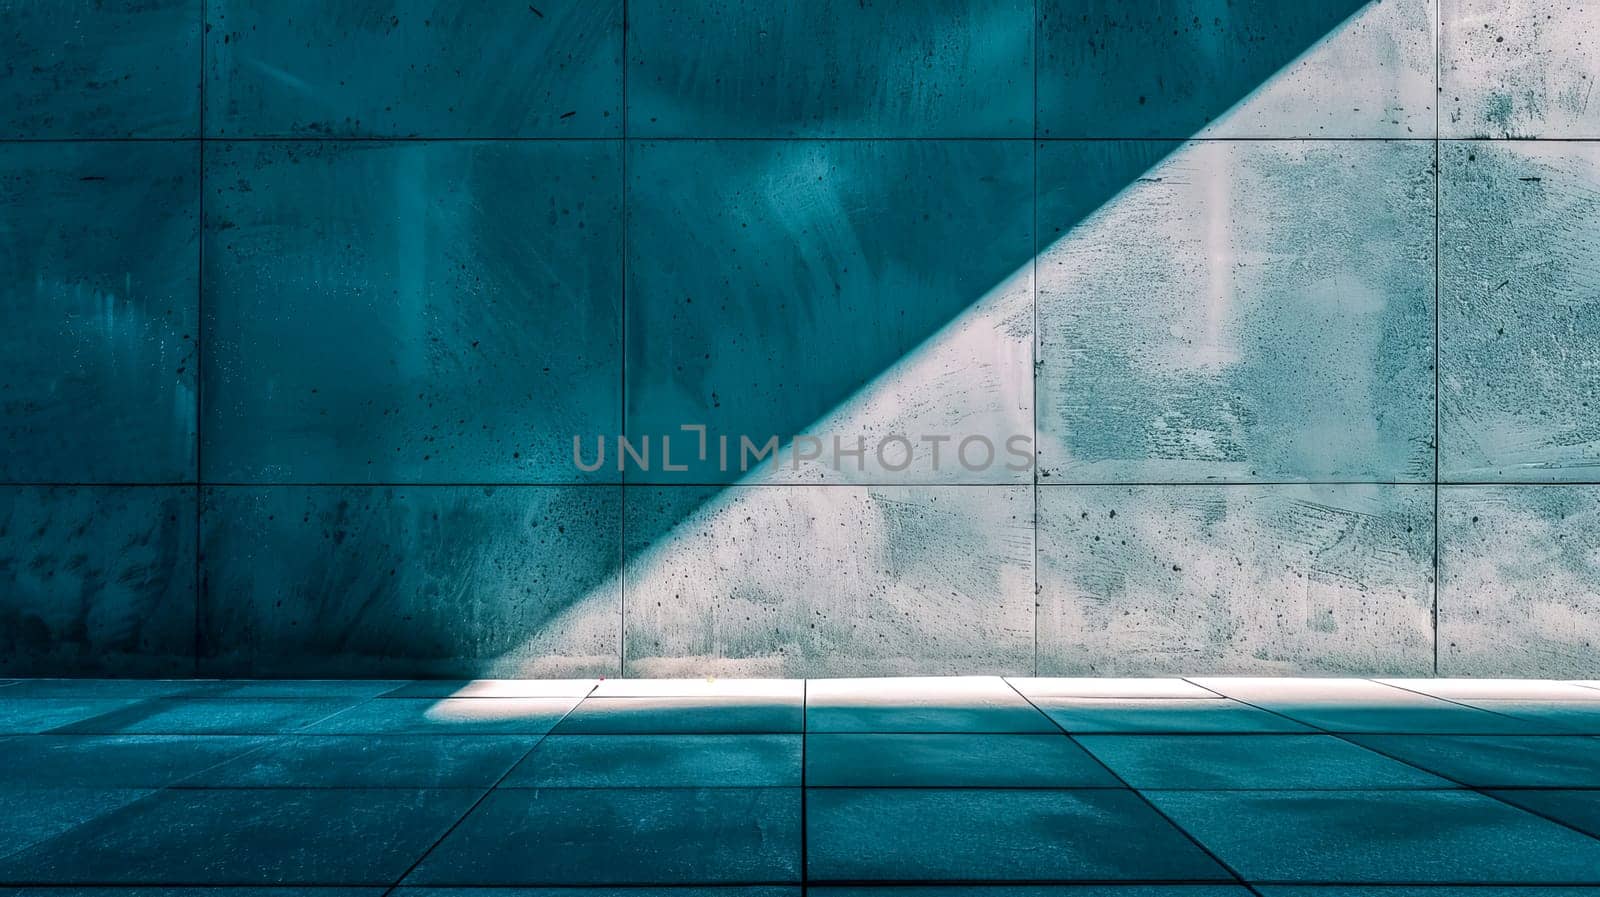 Sunlight casts a diagonal shadow on a textured concrete wall, creating a play of light and shadow